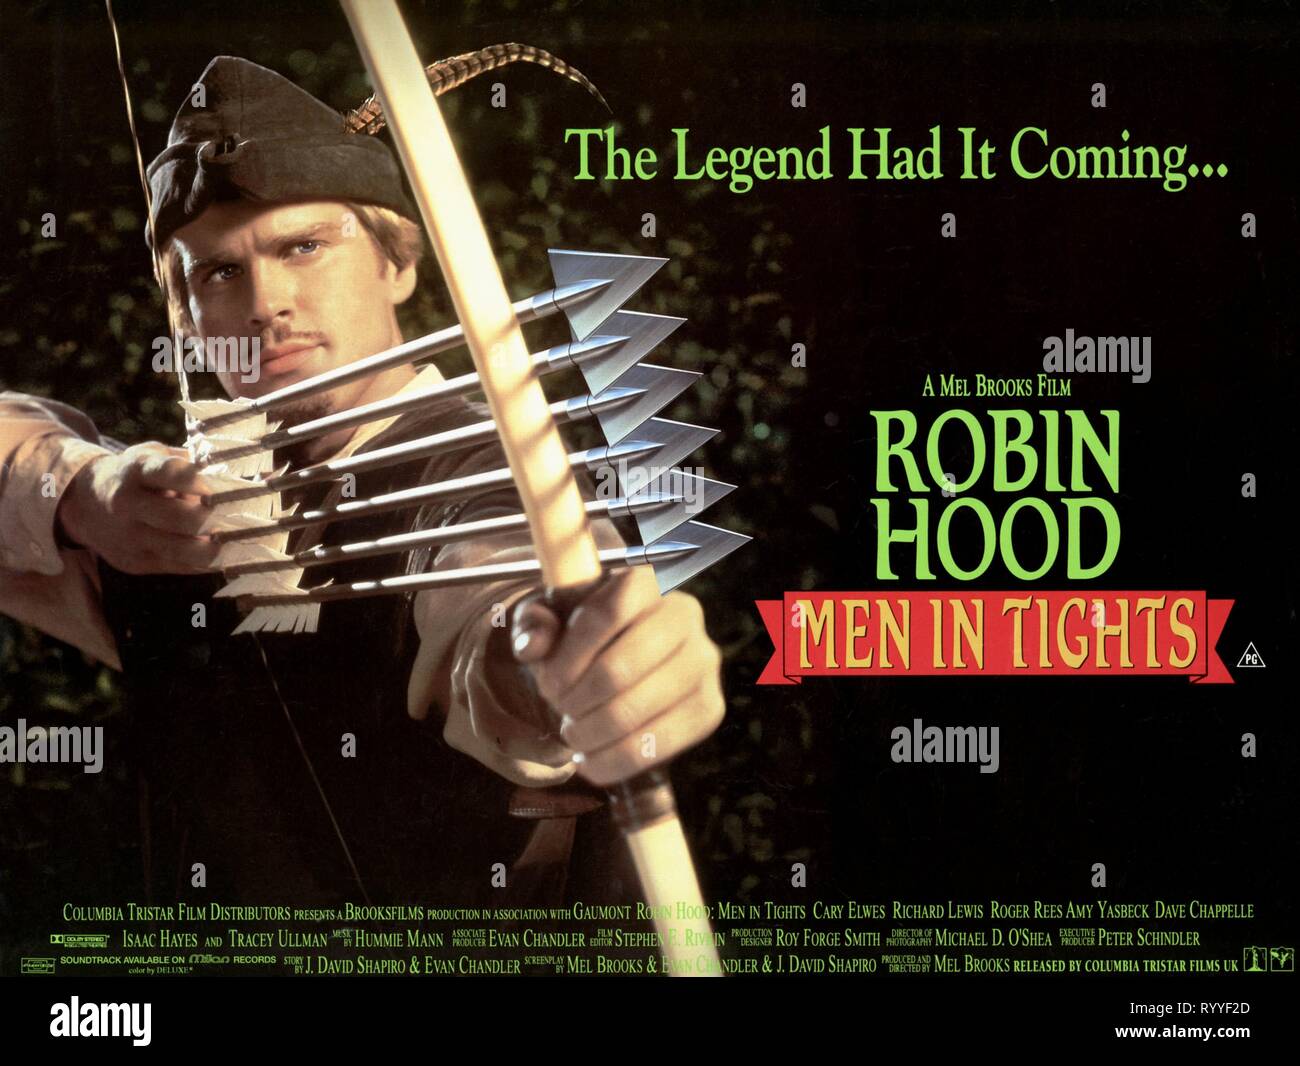 CARY ELWES MOVIE POSTER, ROBIN HOOD: MEN IN TIGHTS, 1993 Stock Photo - Alamy